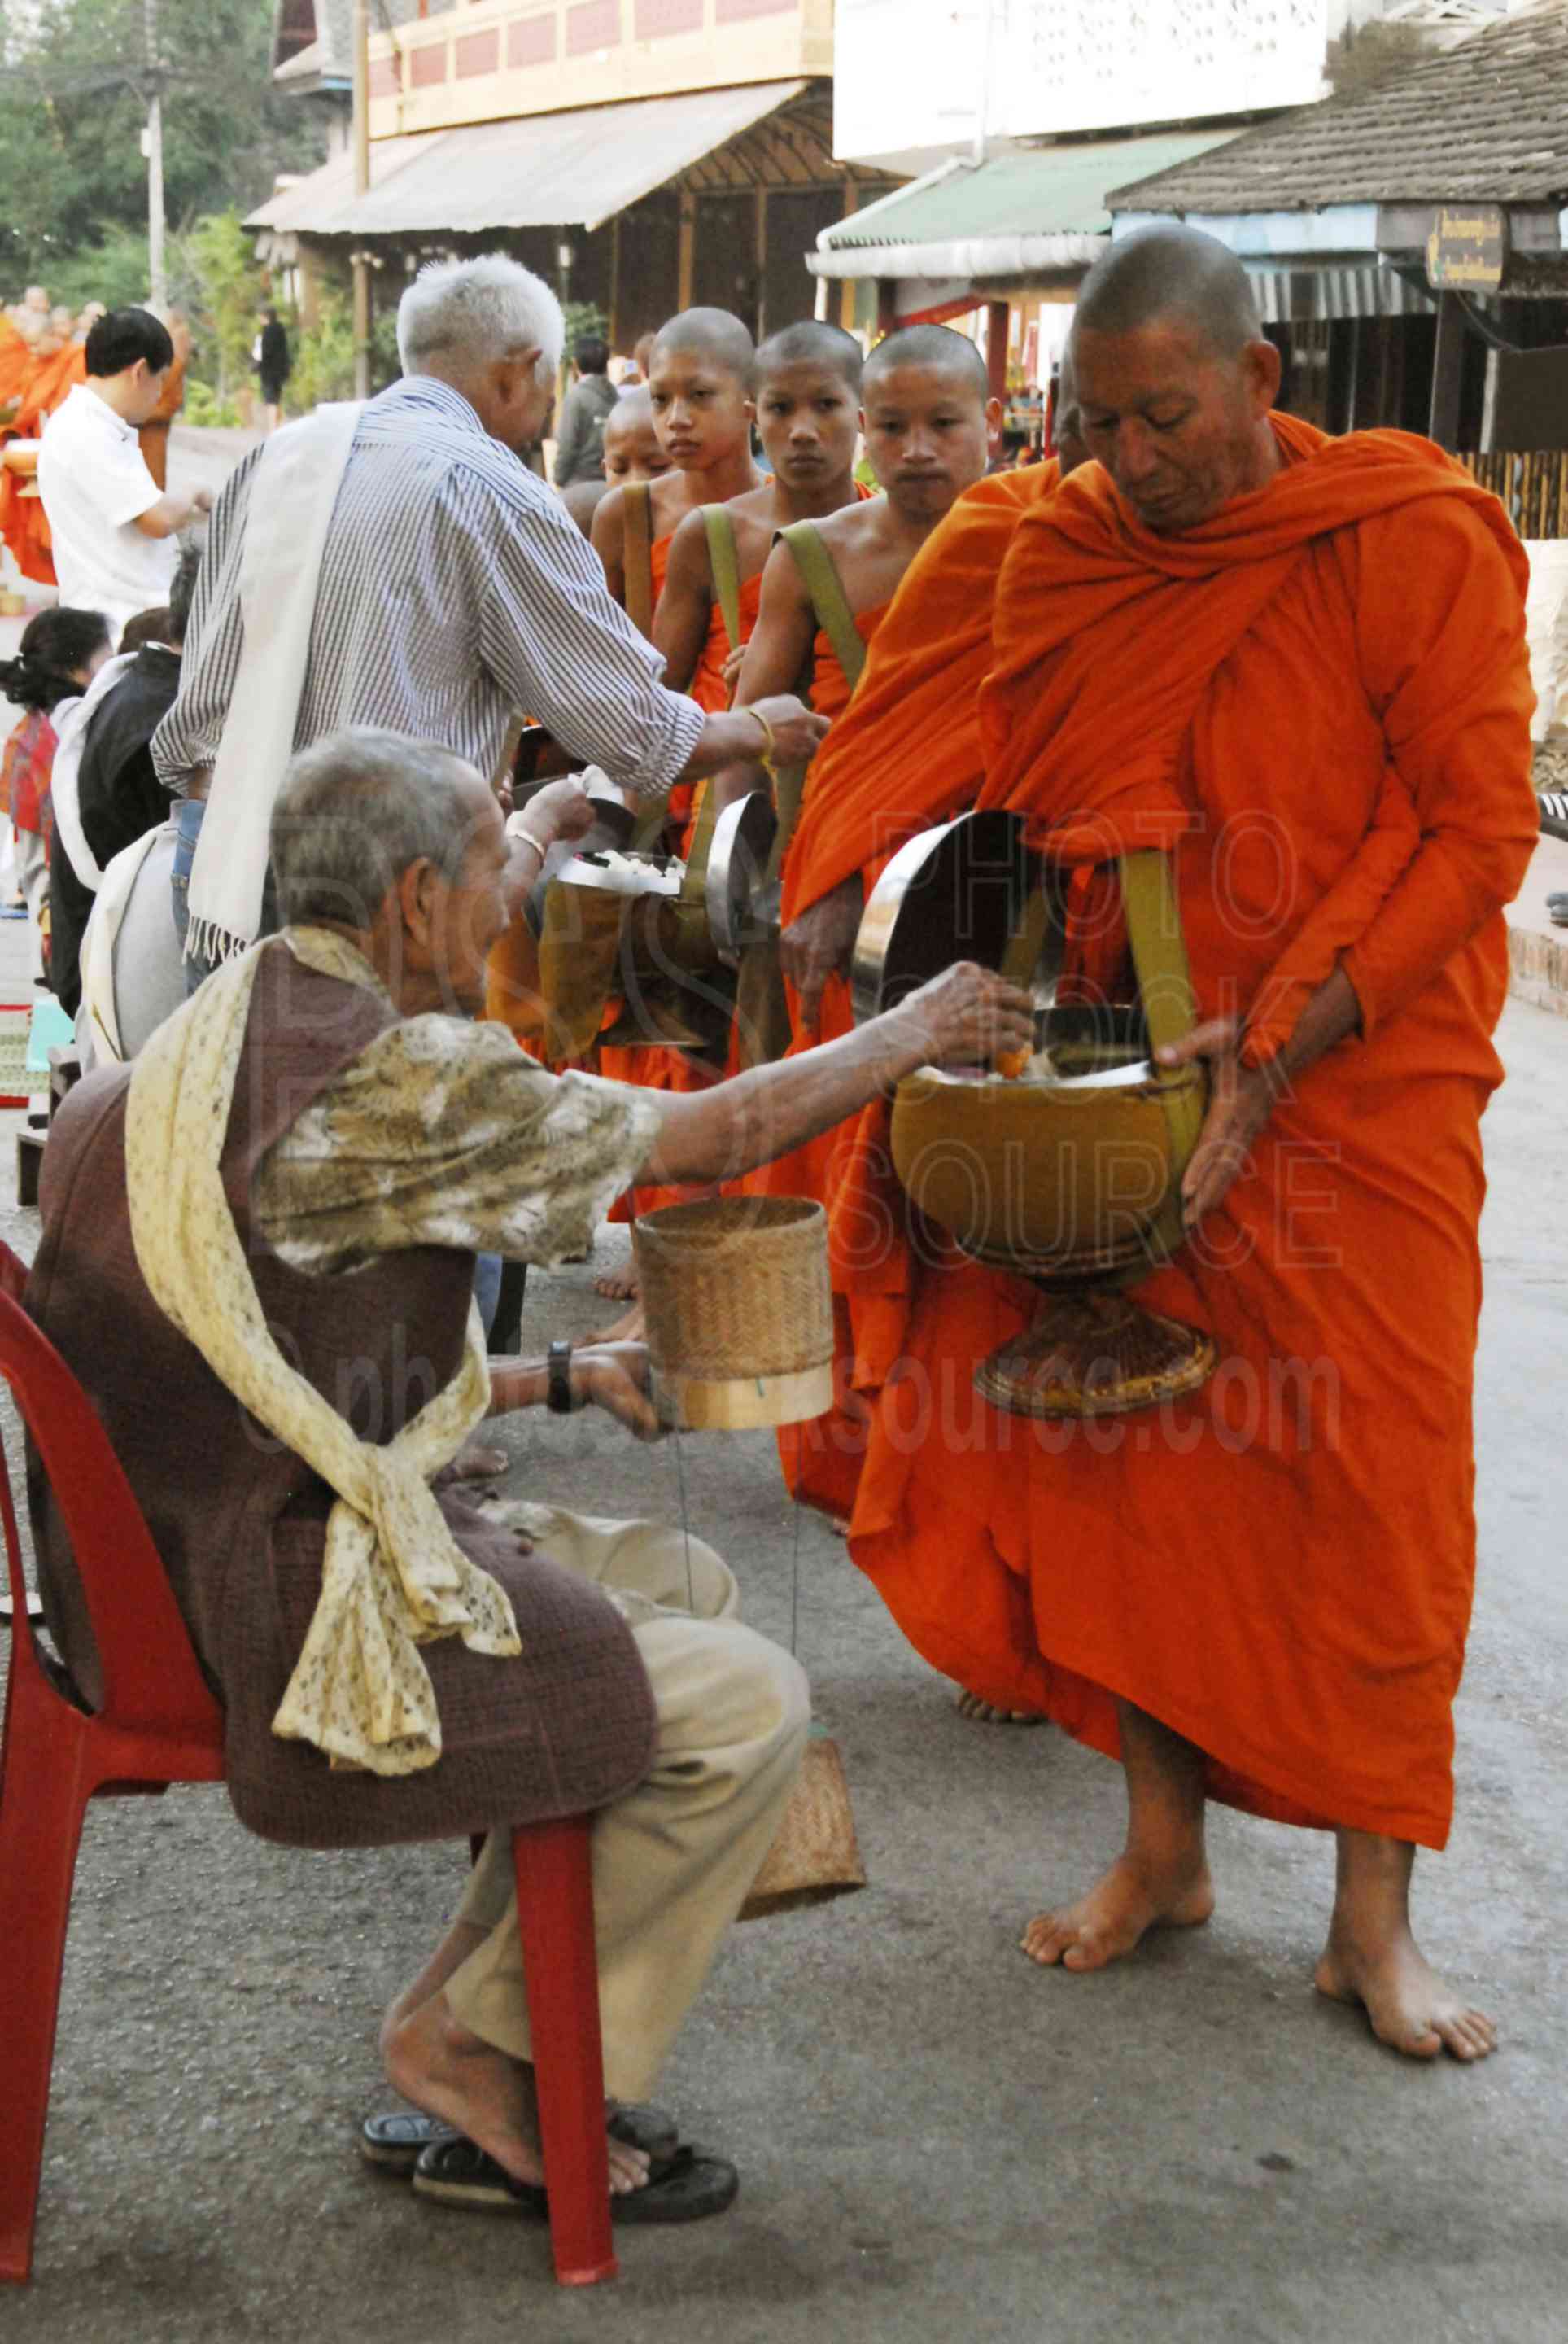 Alms Giving Ceremony,buddhist,buddhism,monks,alms,giving,charity,give,ceremony,binthabat,tak bat,procession,parade,robes,saffron,food,breakfast,morning